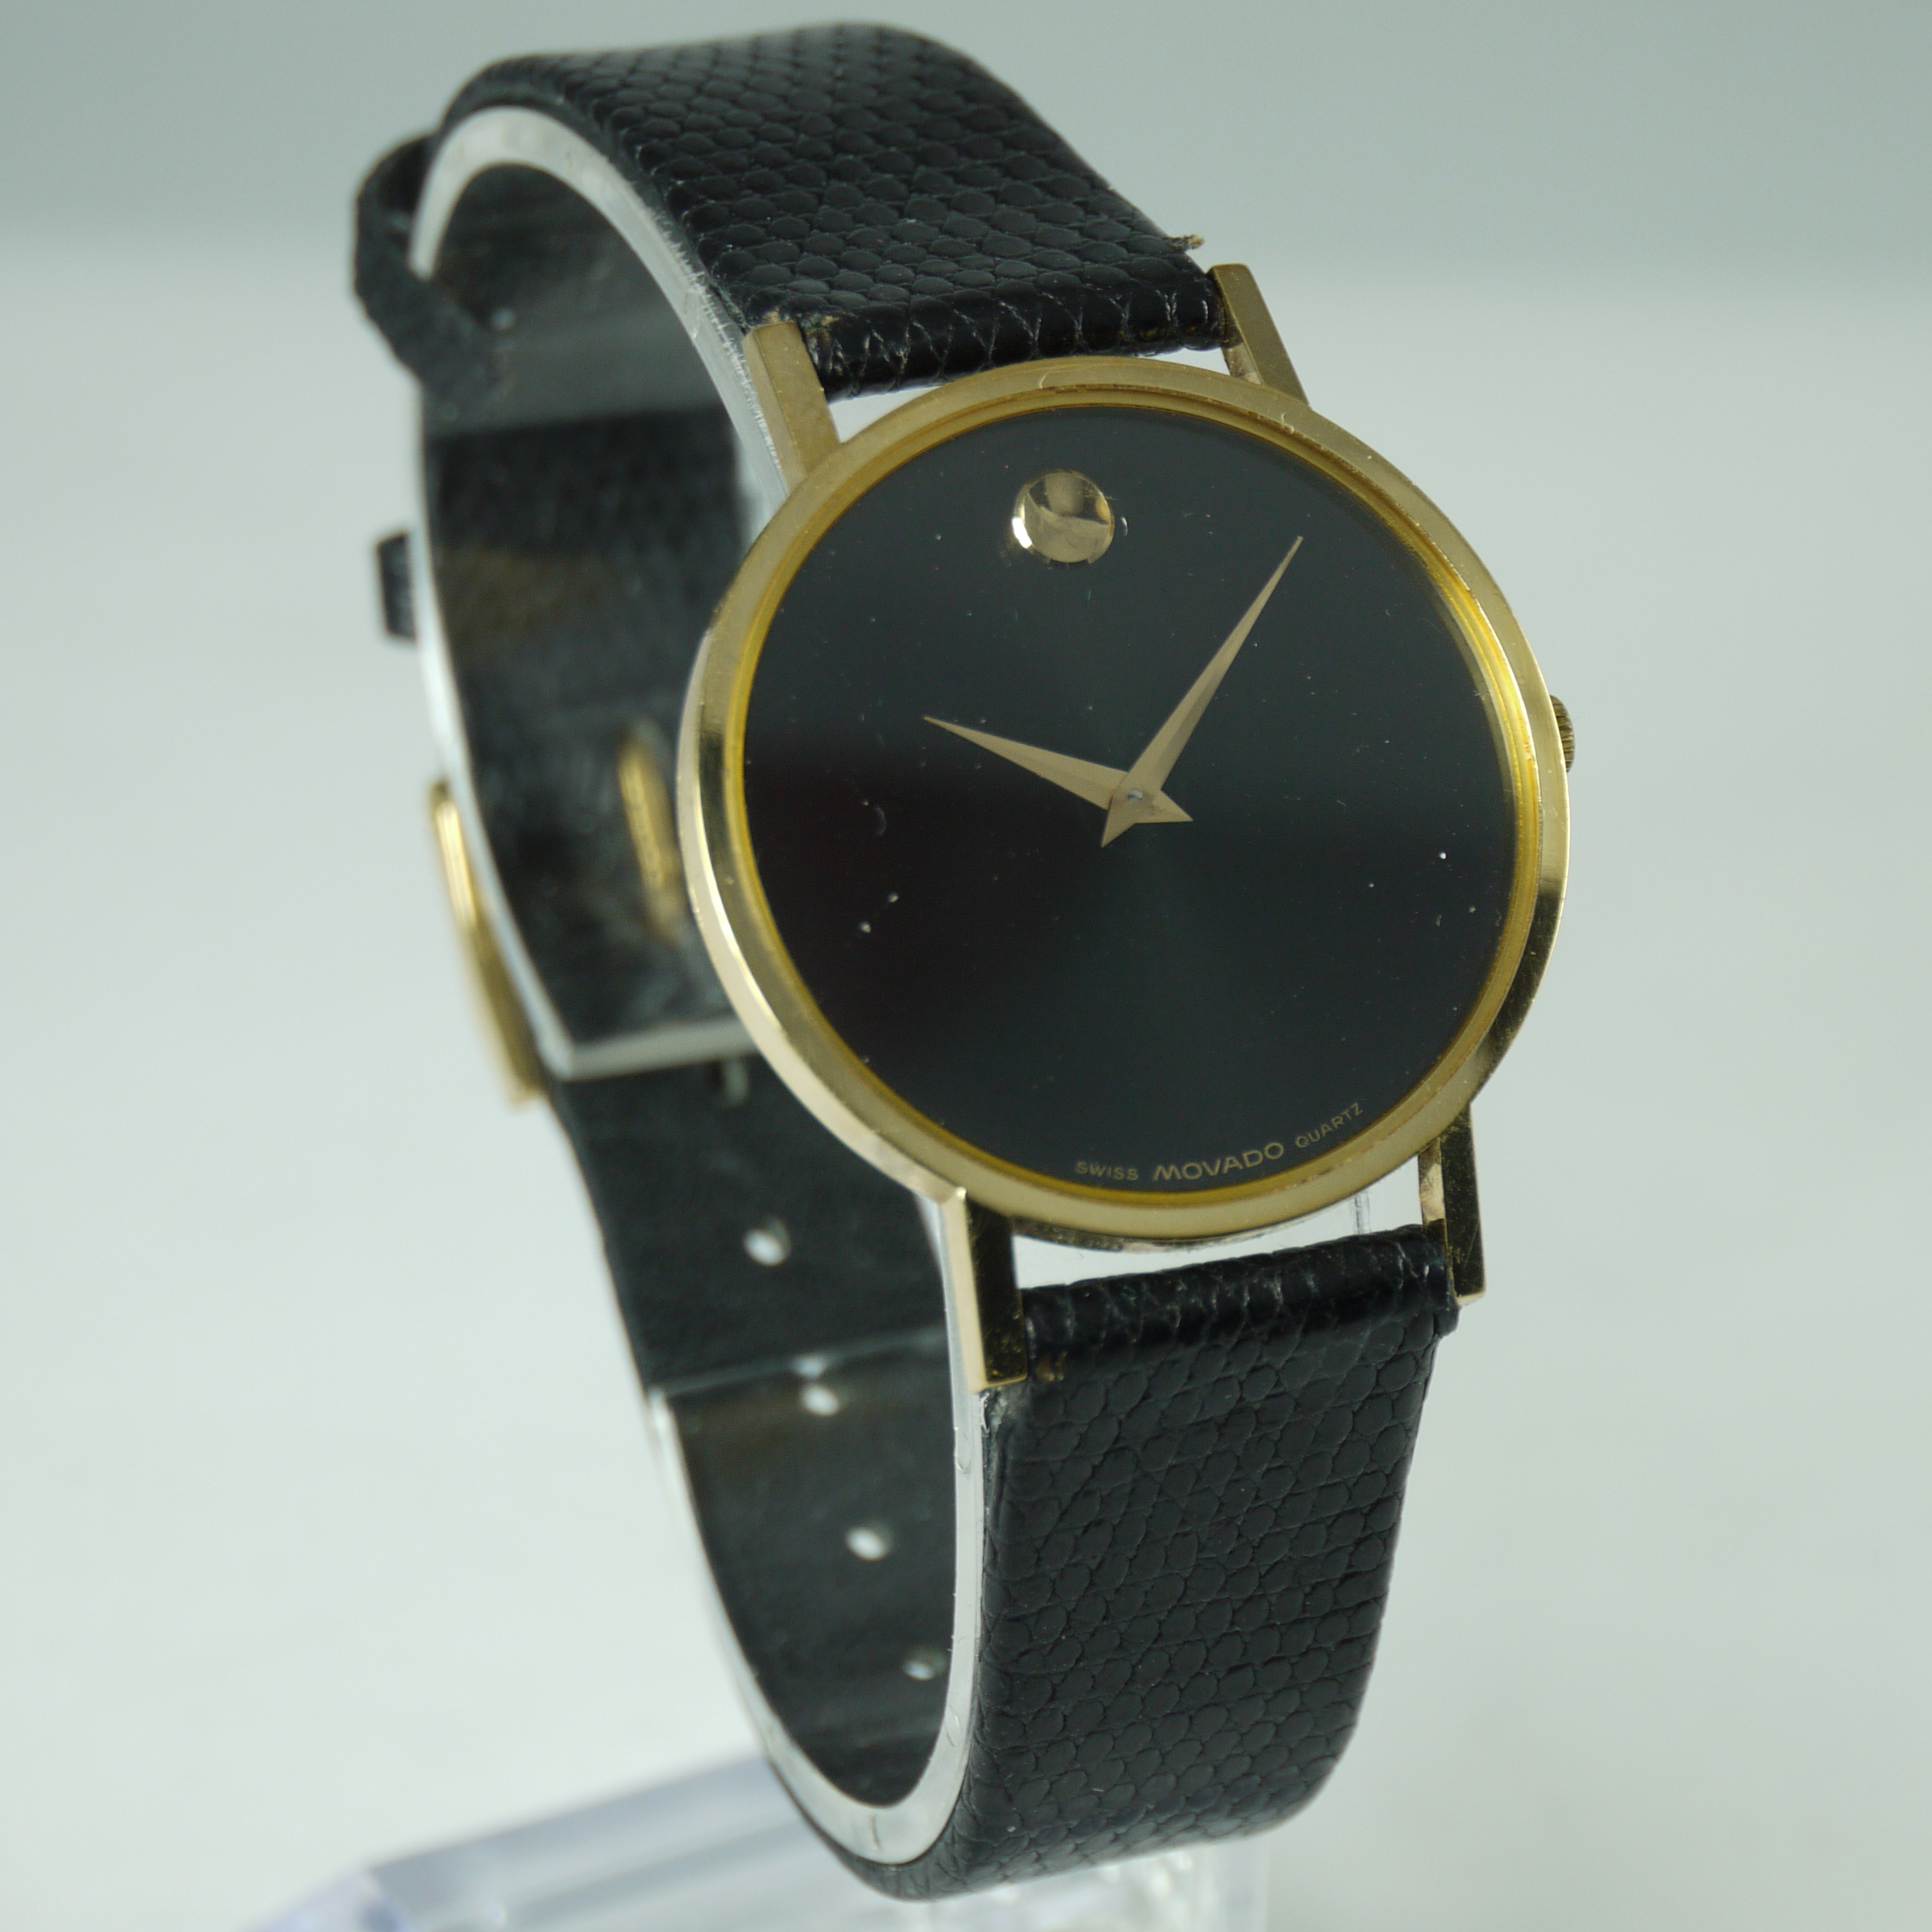 Movado Quartz Museum Watch in 14 karat yellow gold on black leather band